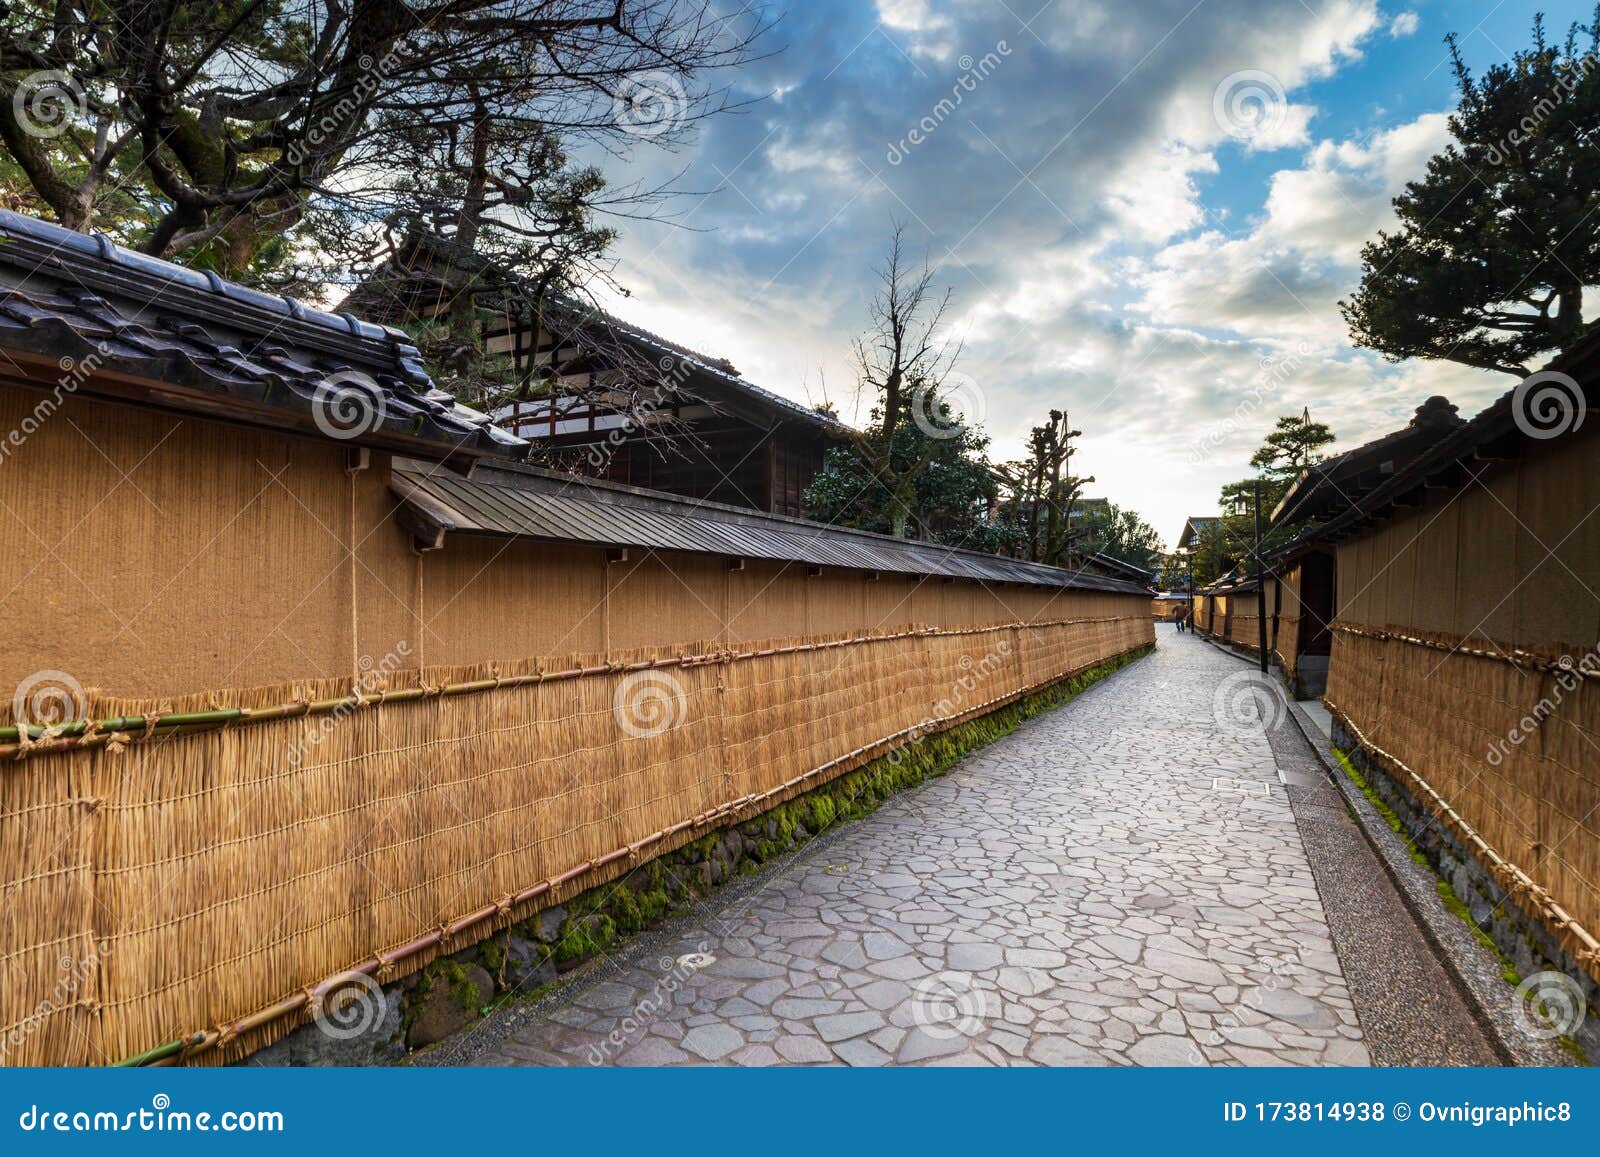 nagamashi district or samurai district street with dramatic sky showing the earthen walls covered with straw mats, kanazawa, japan